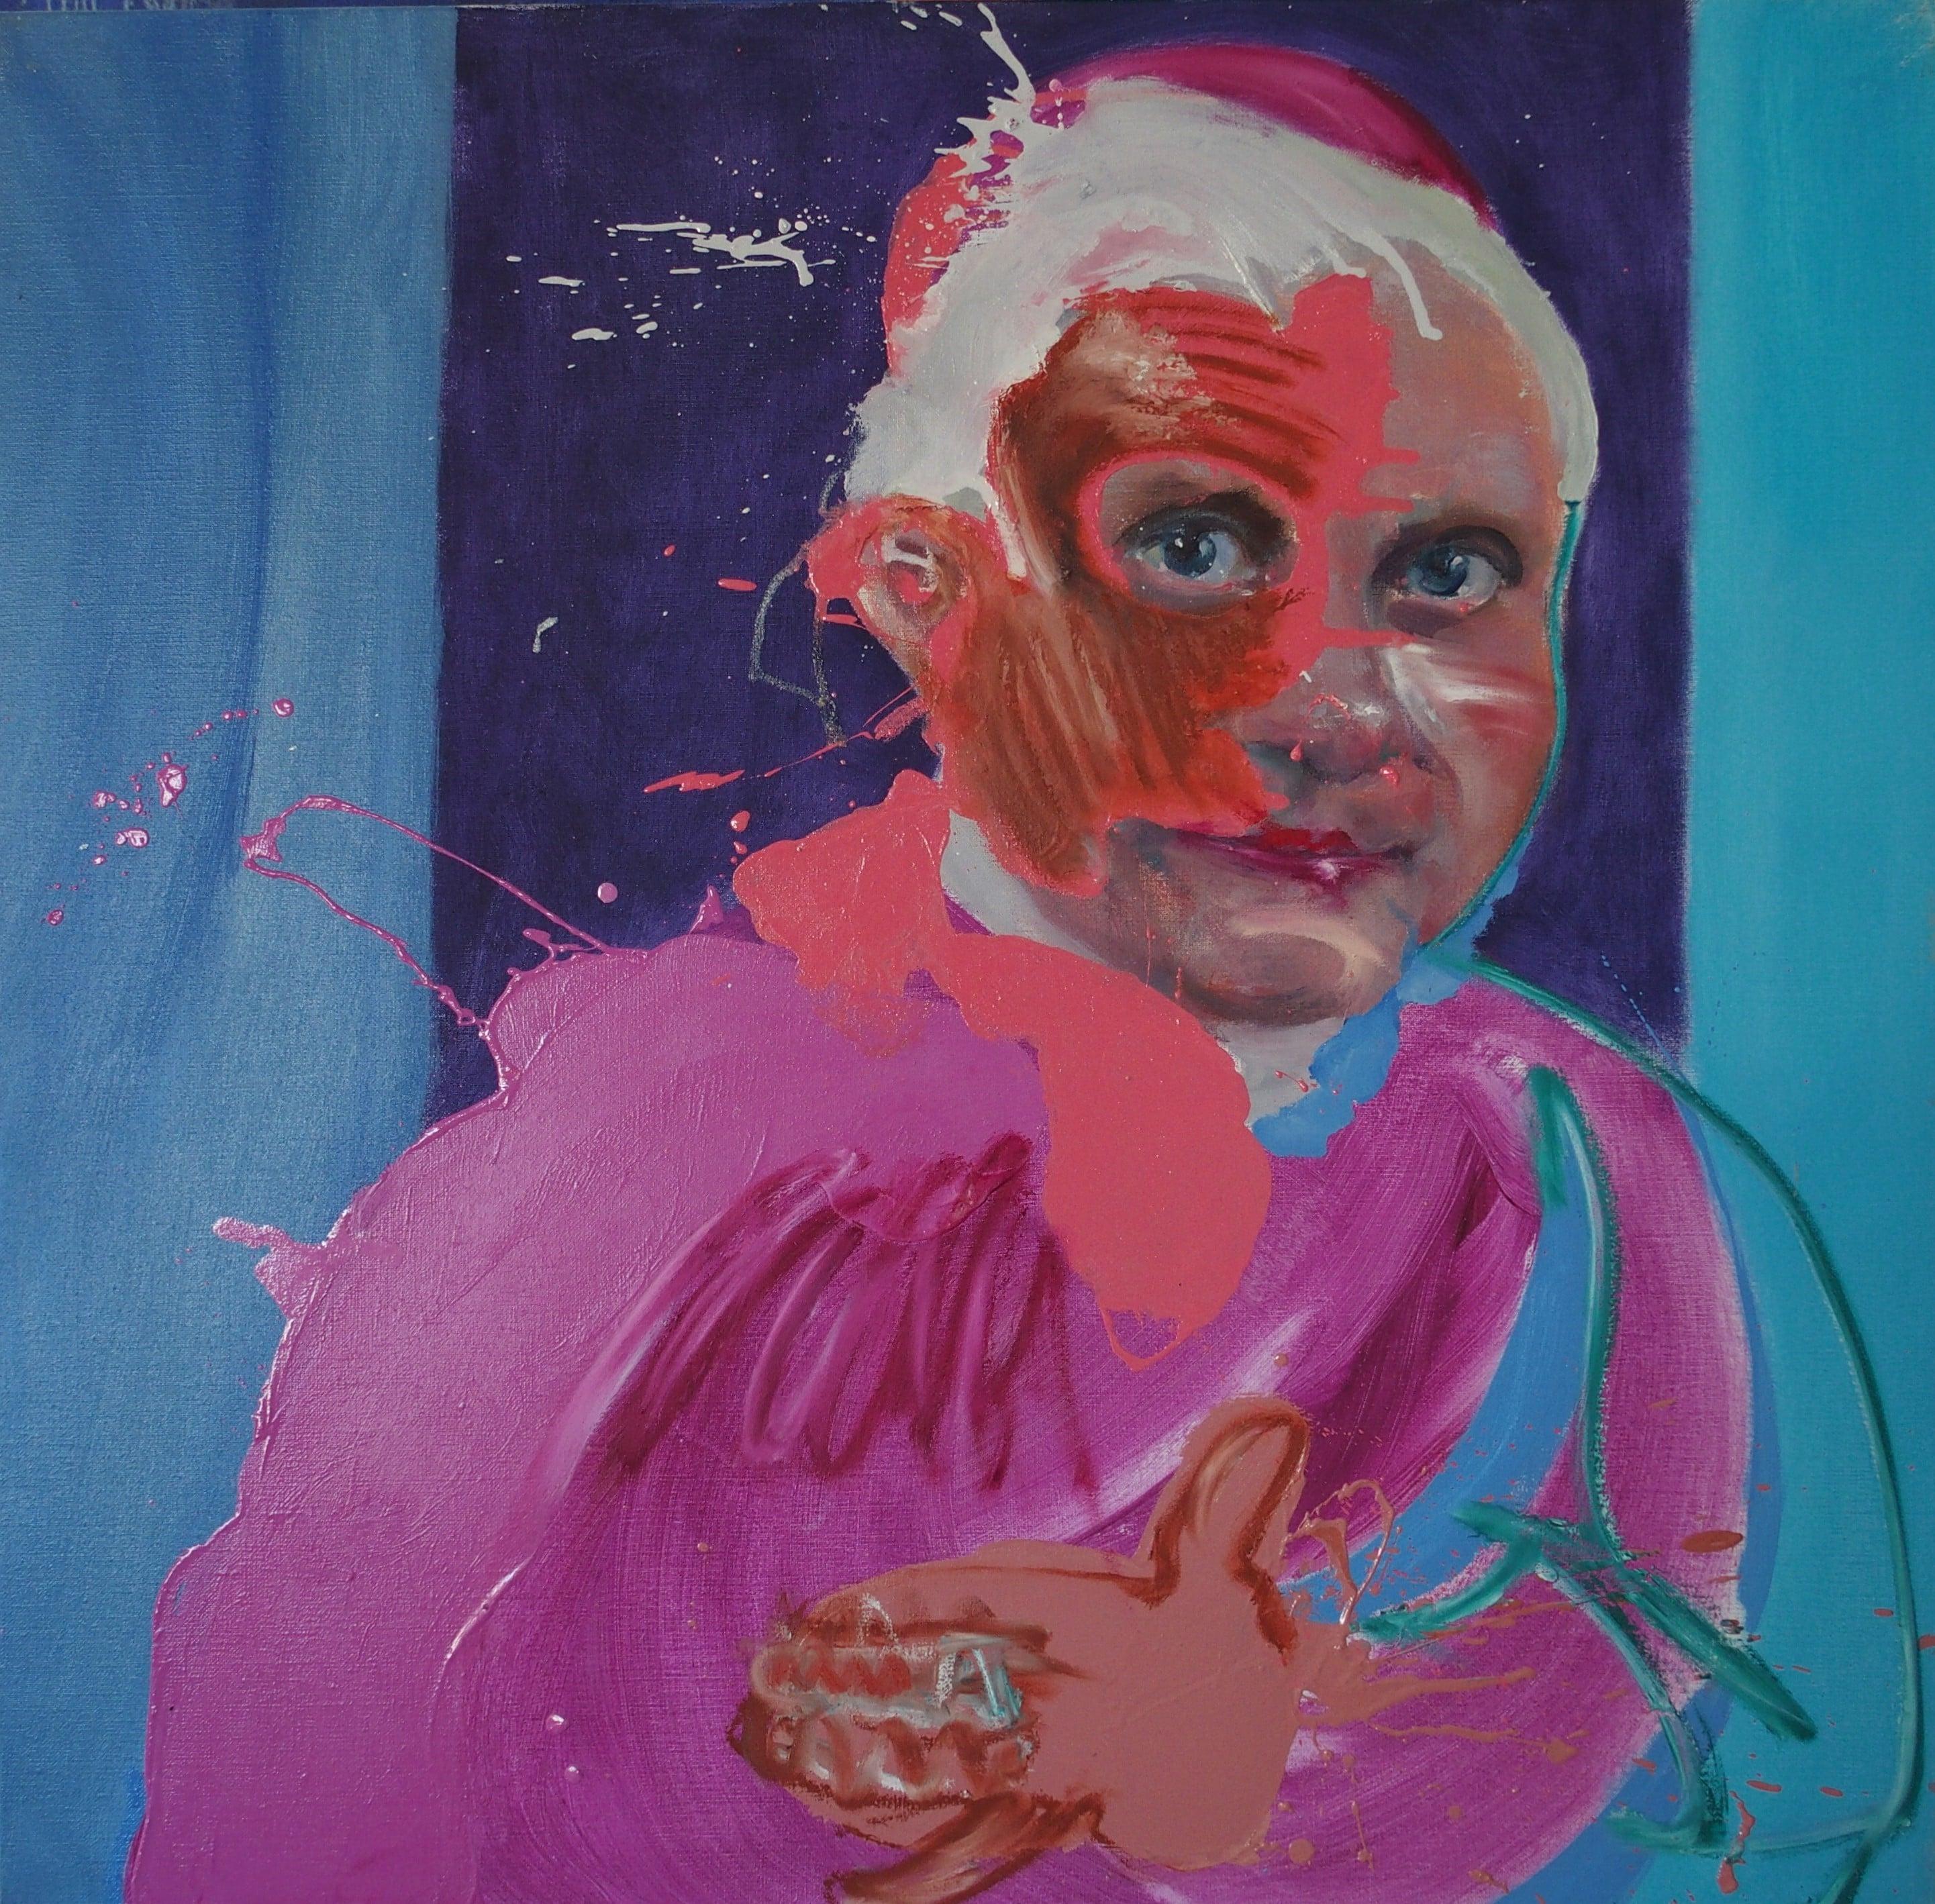 Ratzinger Chocolat is a unique oil on canvas painting by contemporary artist Christophe Dupety, dimensions are 80 × 80 cm (31.5 × 31.5 in).
The artwork is signed, sold unframed and comes with a certificate of authenticity.

This is a picture of